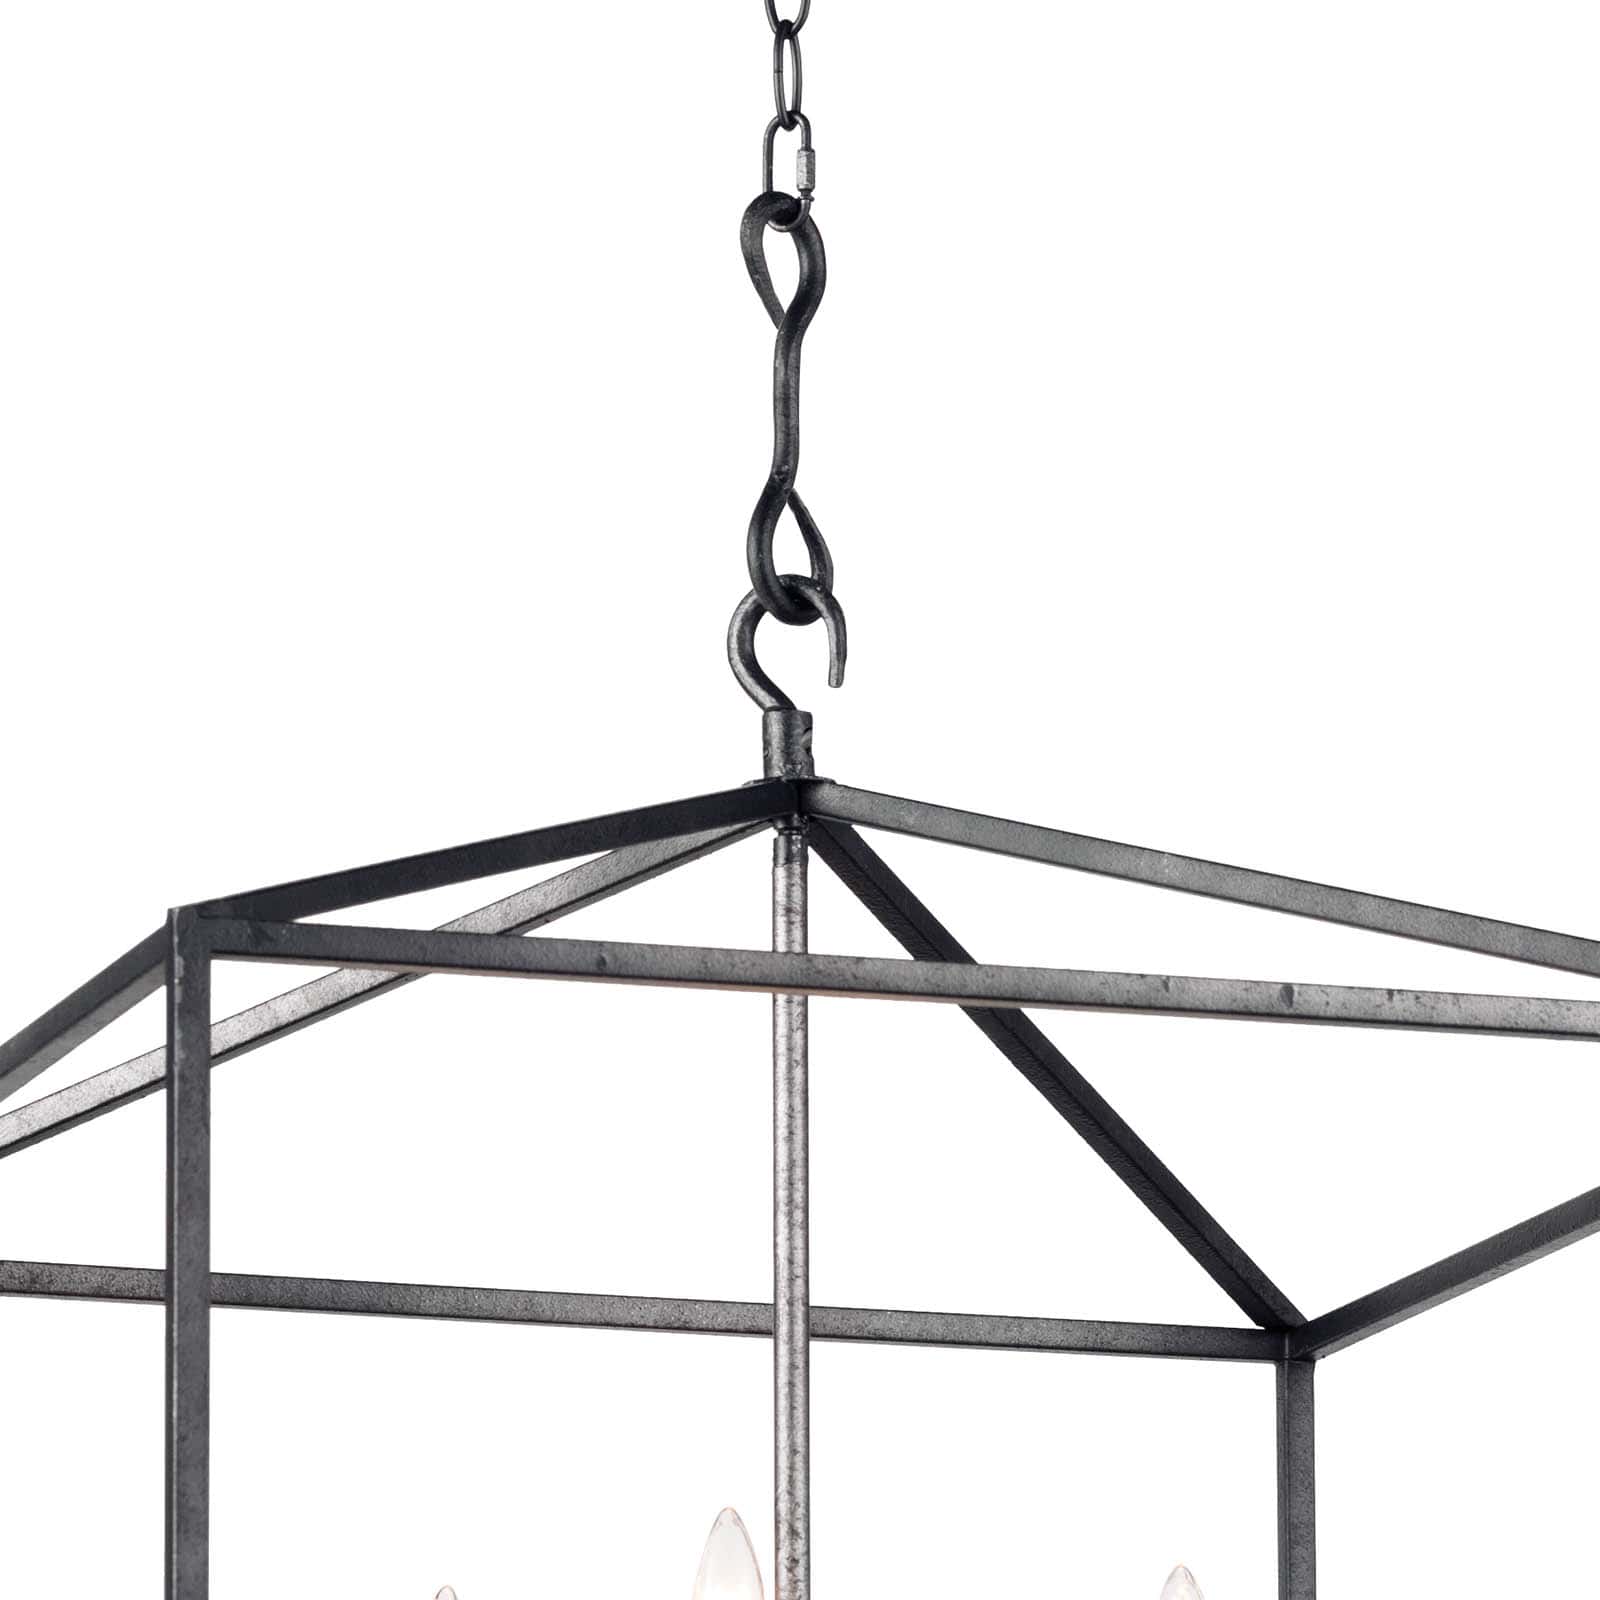 Cape Lantern in Blackened Iron by Southern Living